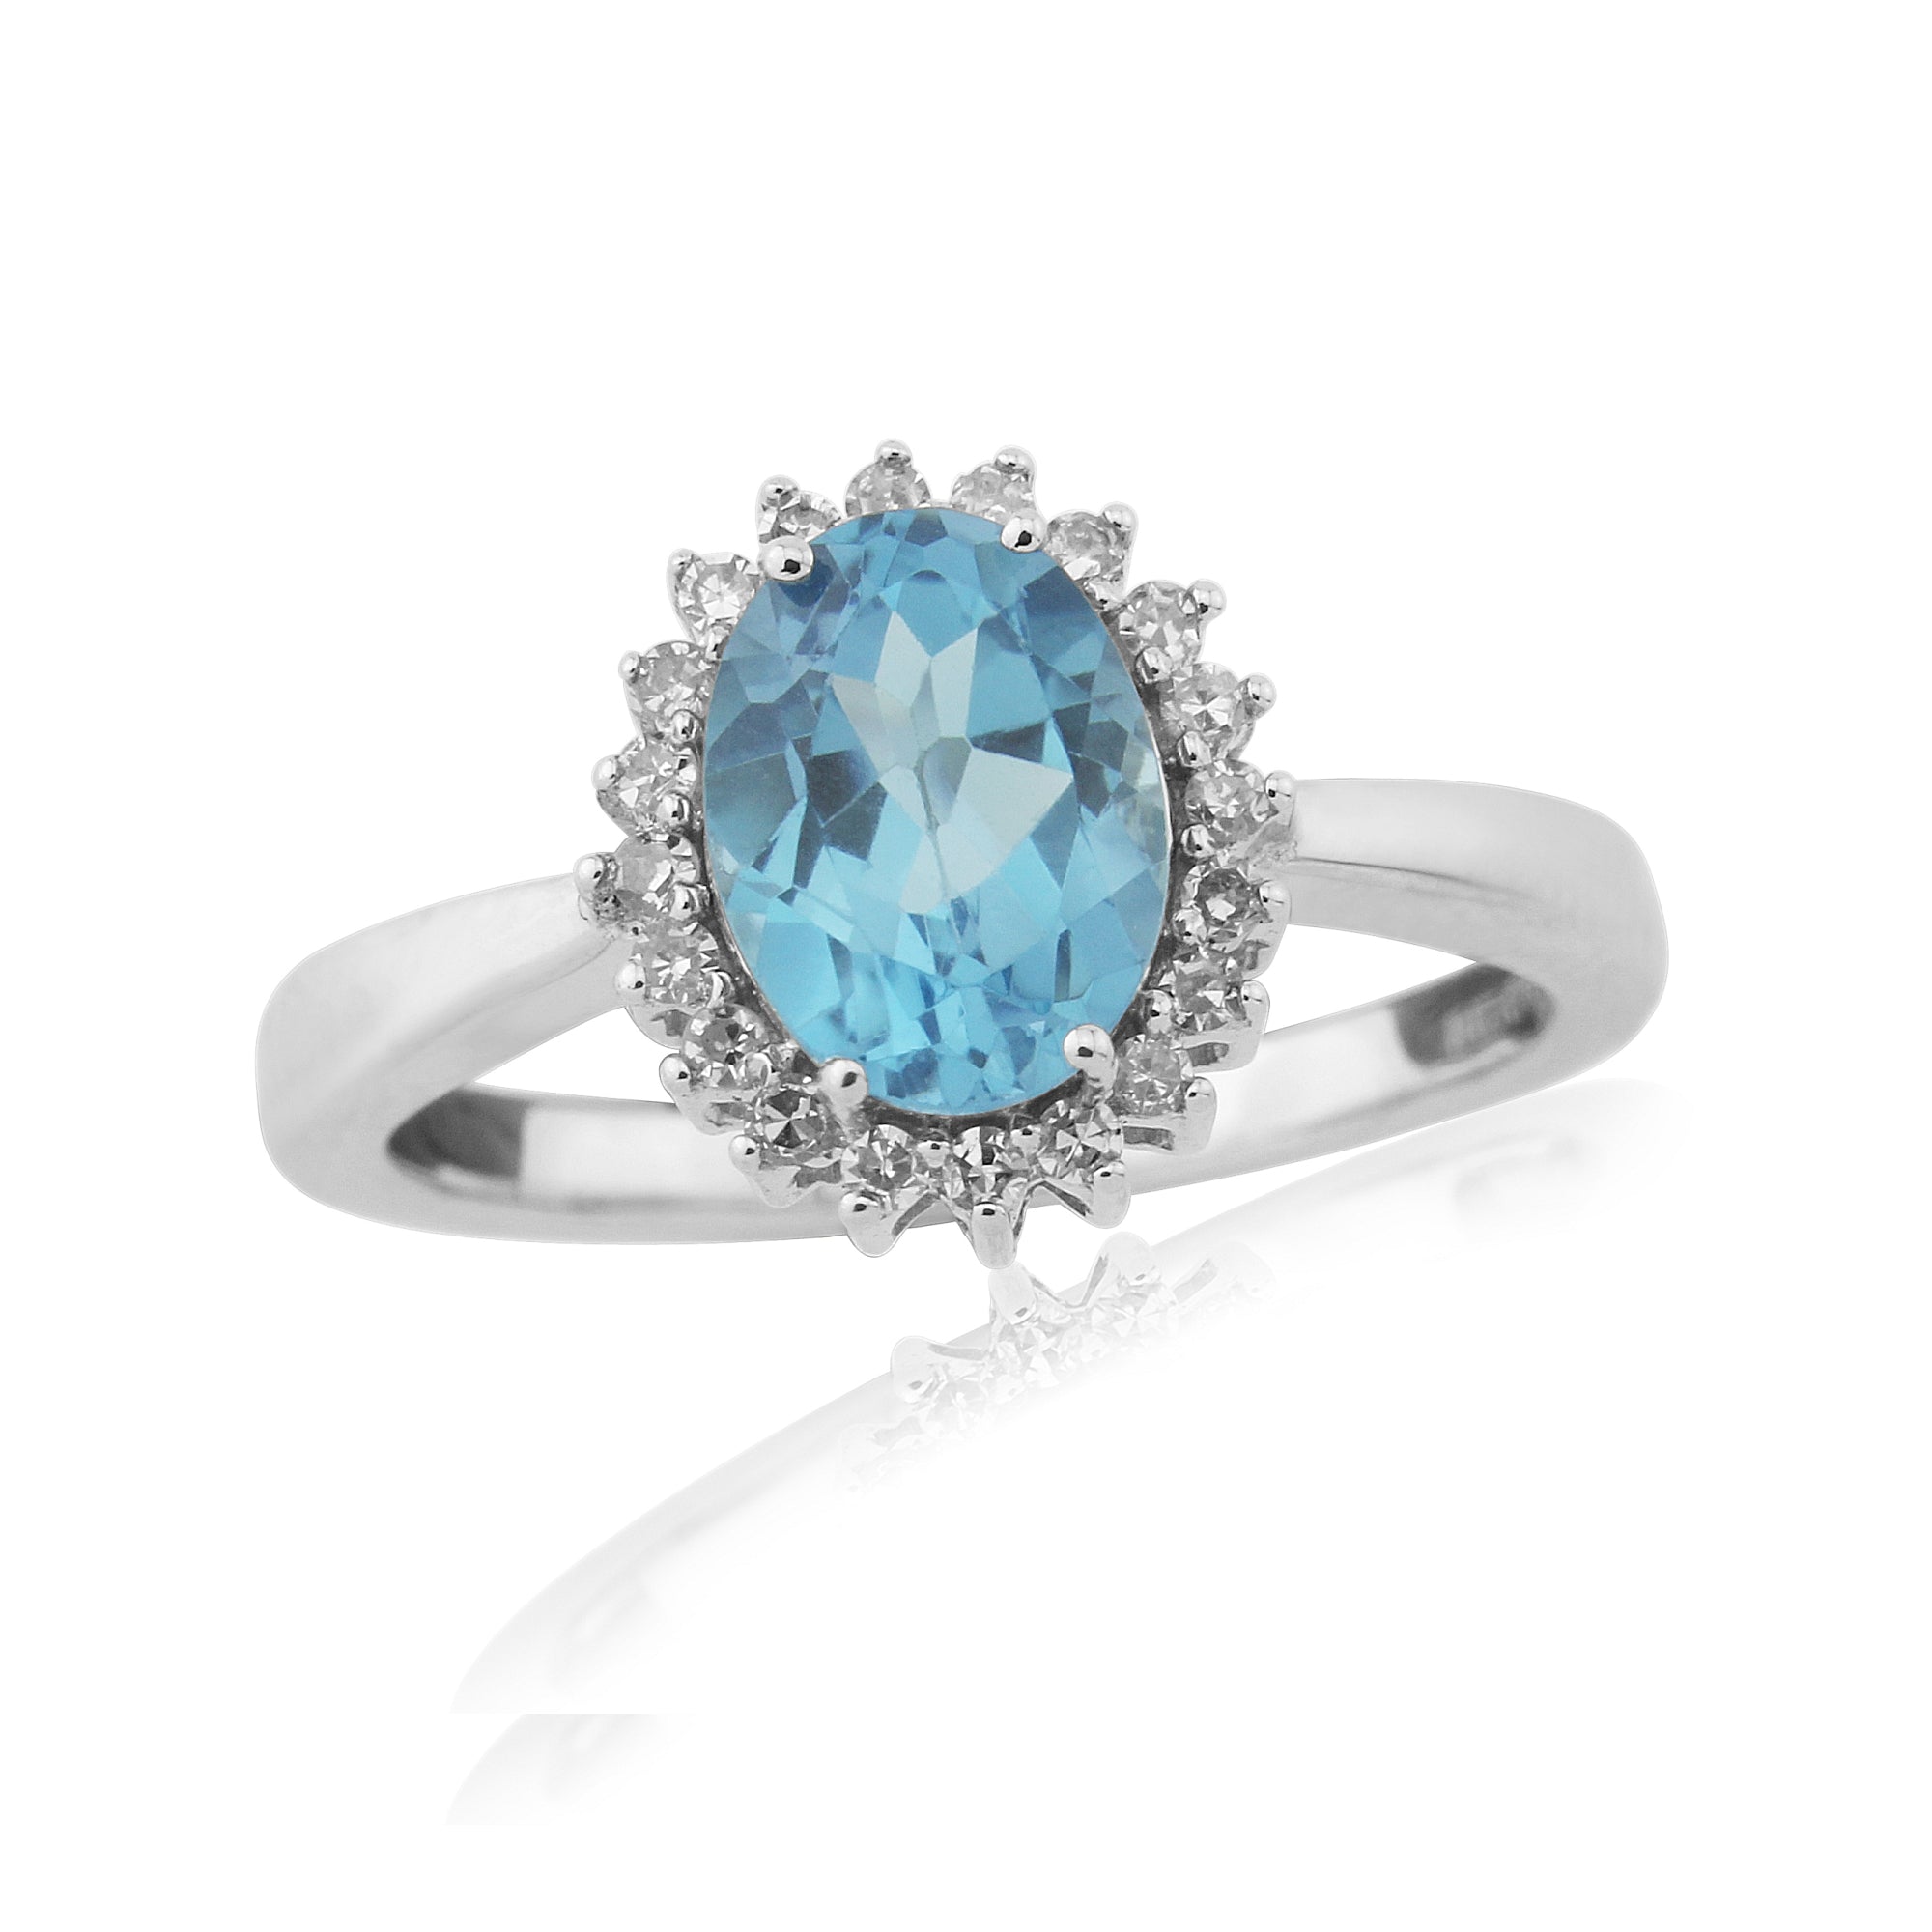 9ct white gold 8x6mm oval blue topaz & diamond cluster ring 0.15ct